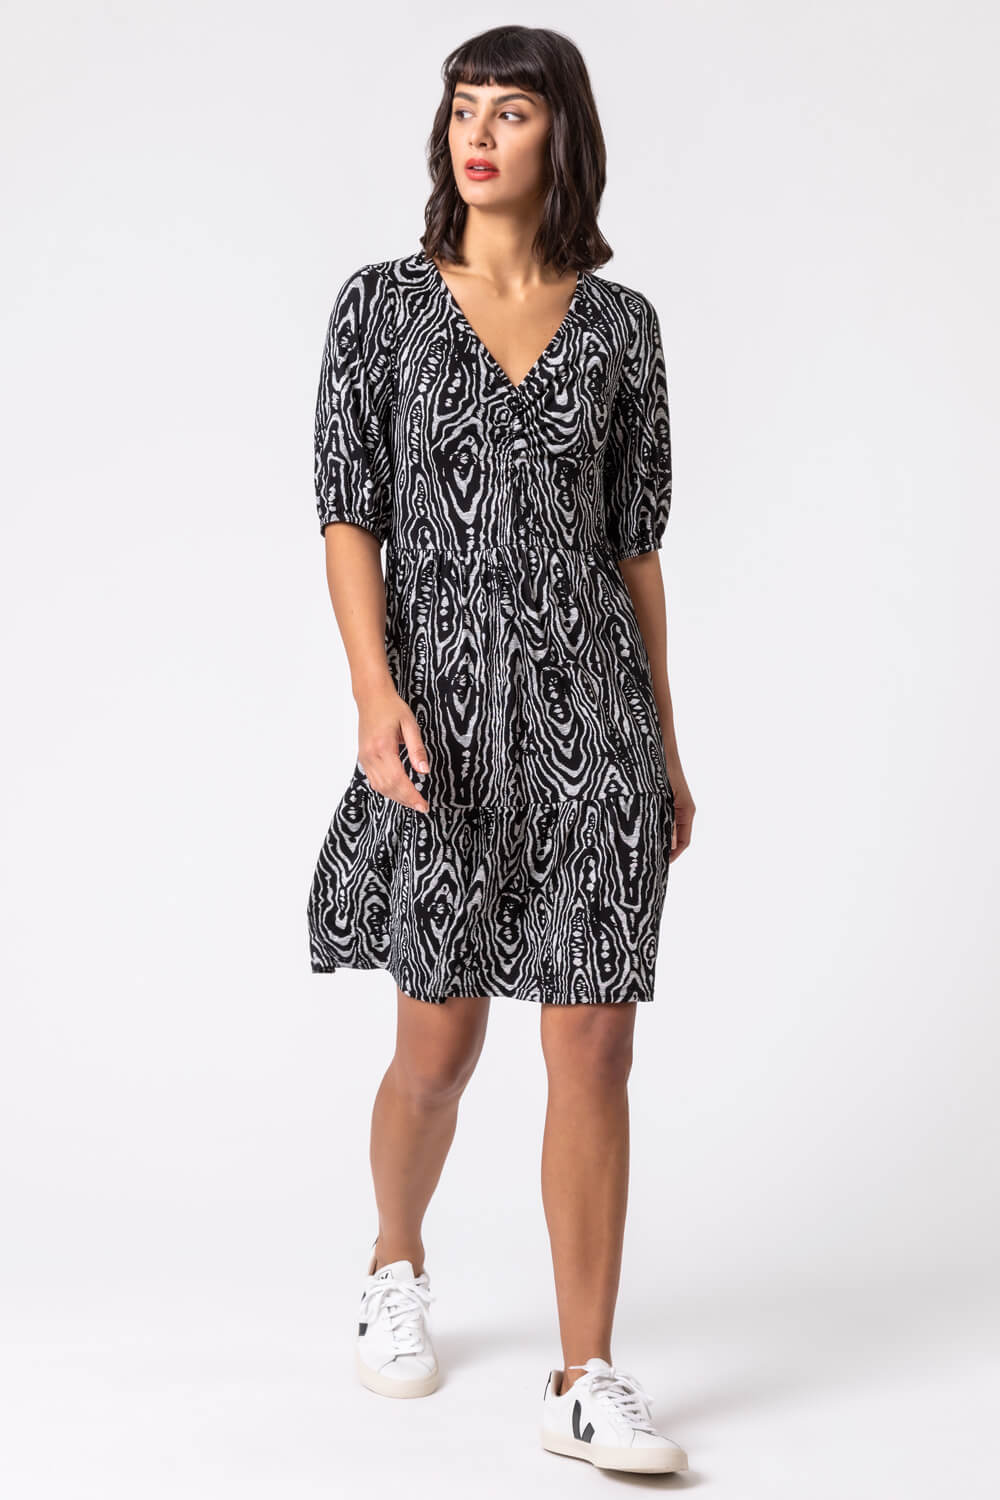 Black Animal Print Tiered Ruched Detail Dress, Image 3 of 5